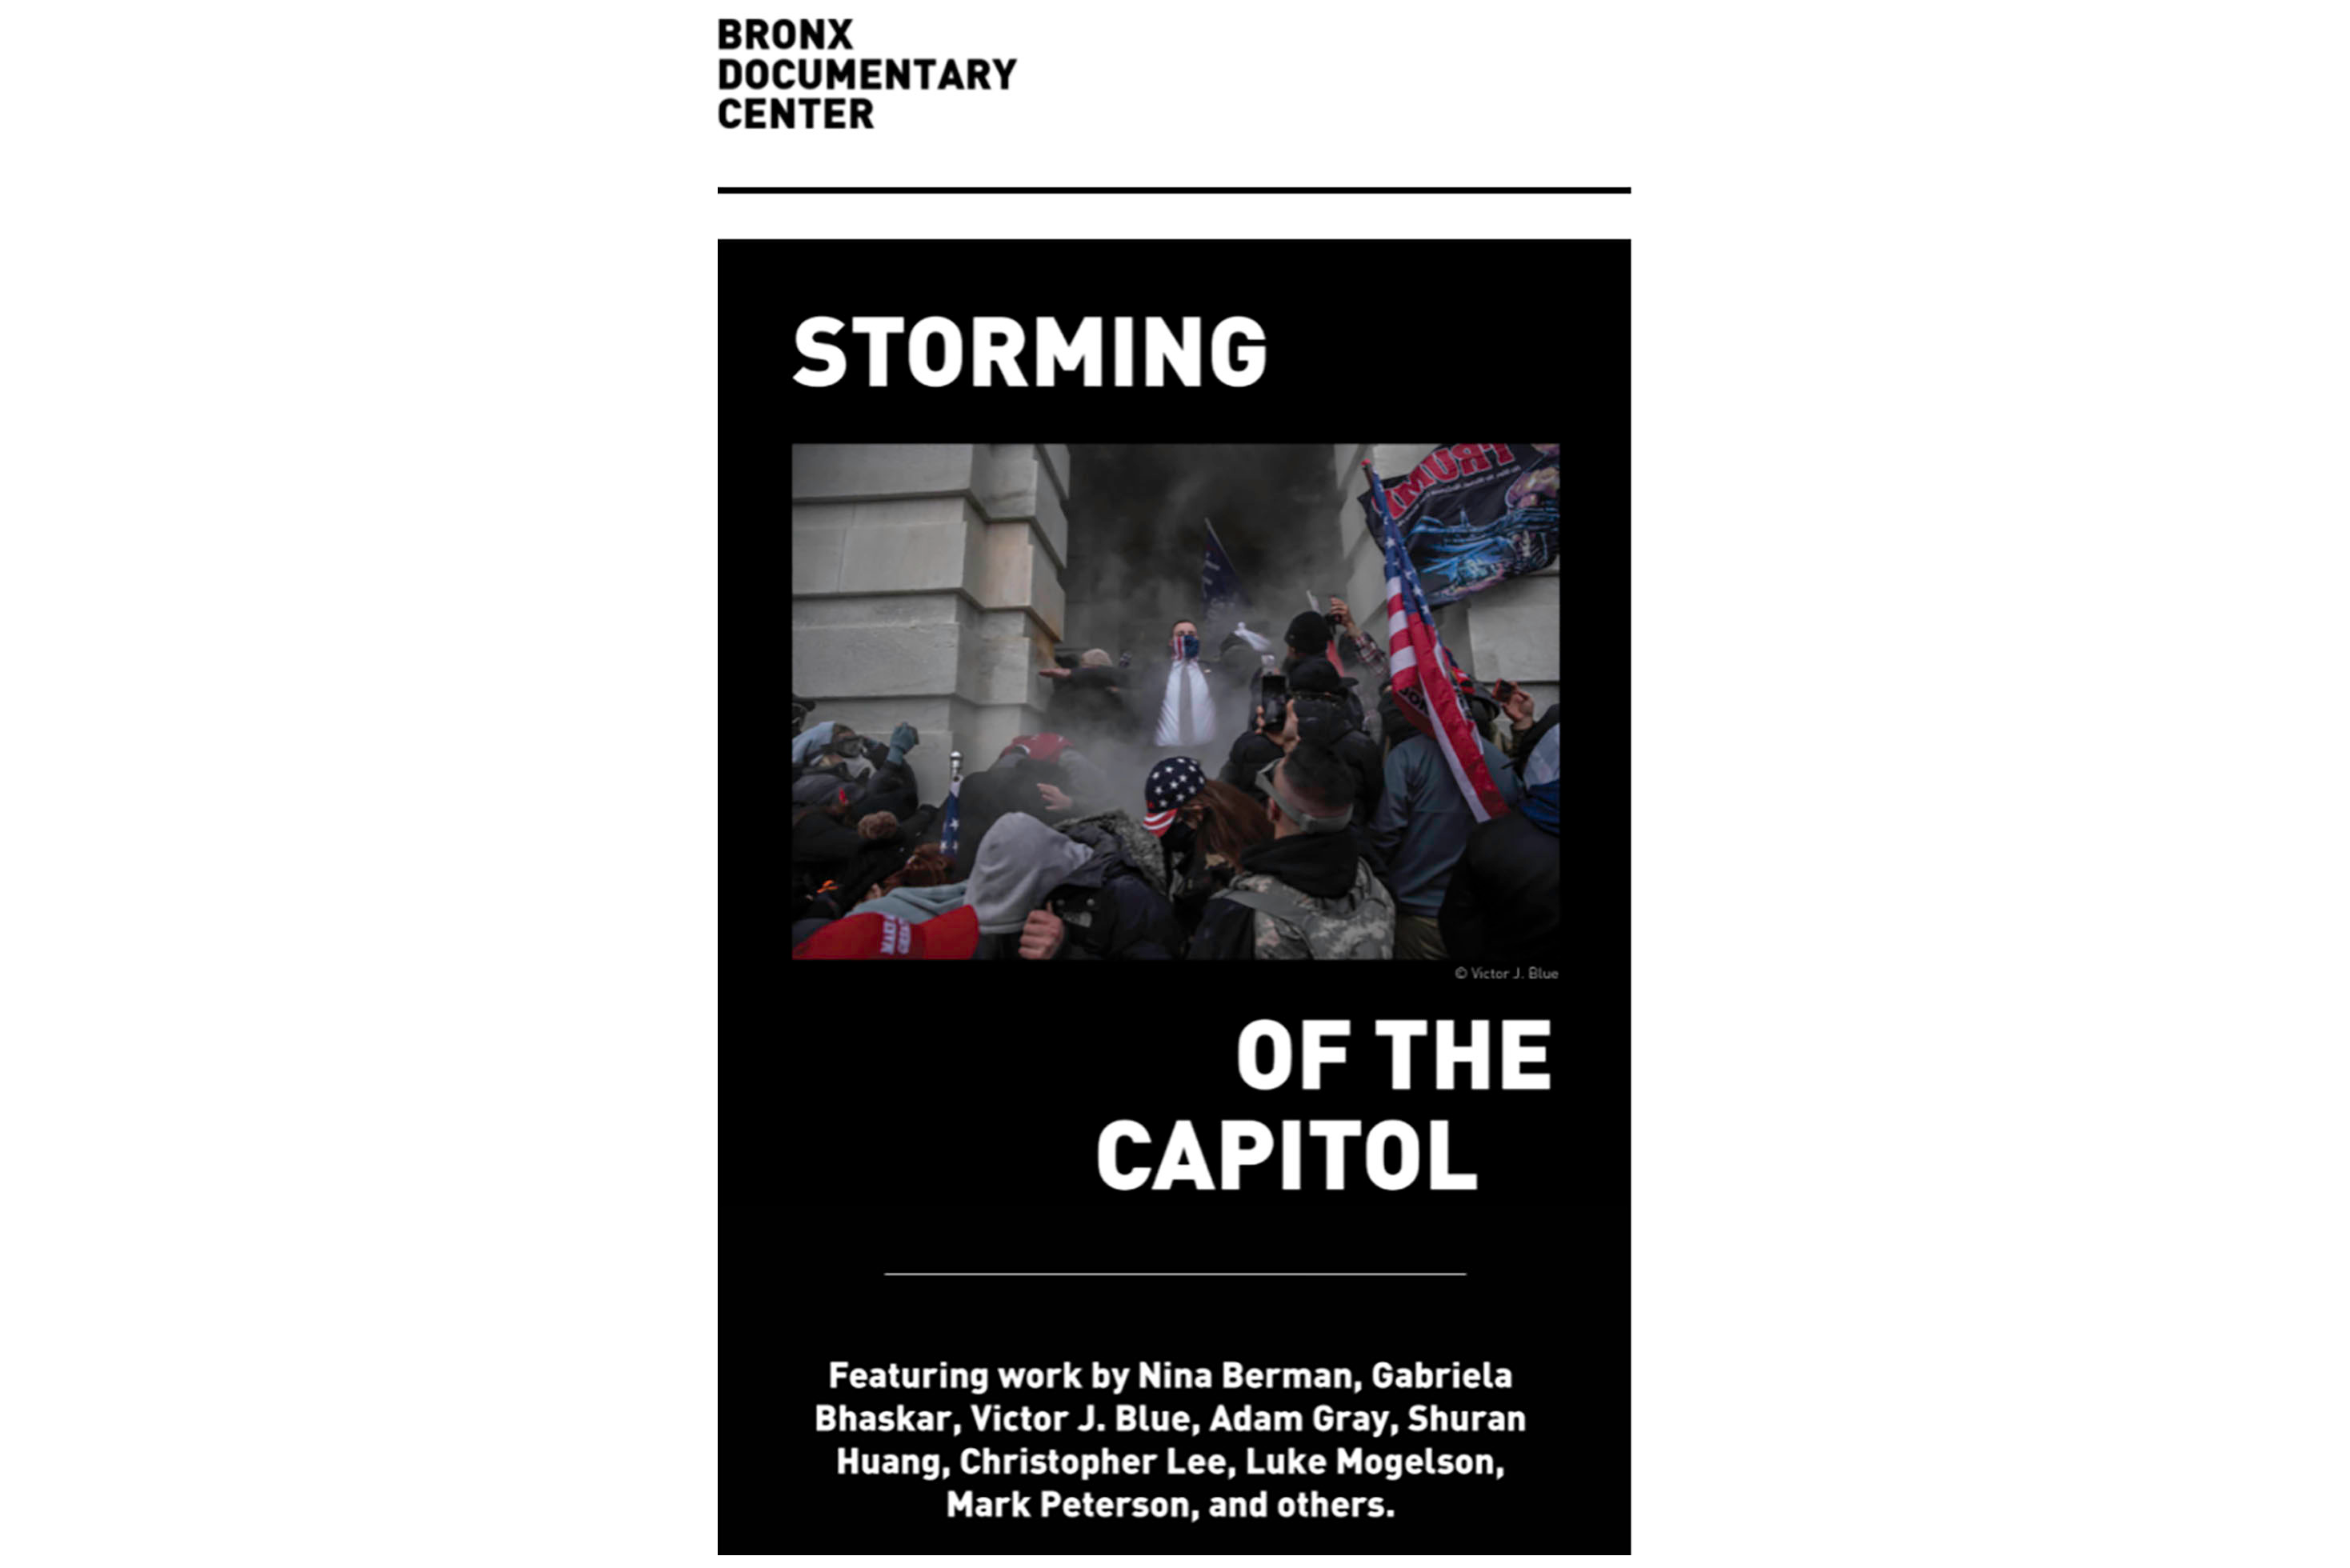 On Bronx Documentary Center "Storming of the Capitol" Exhibition